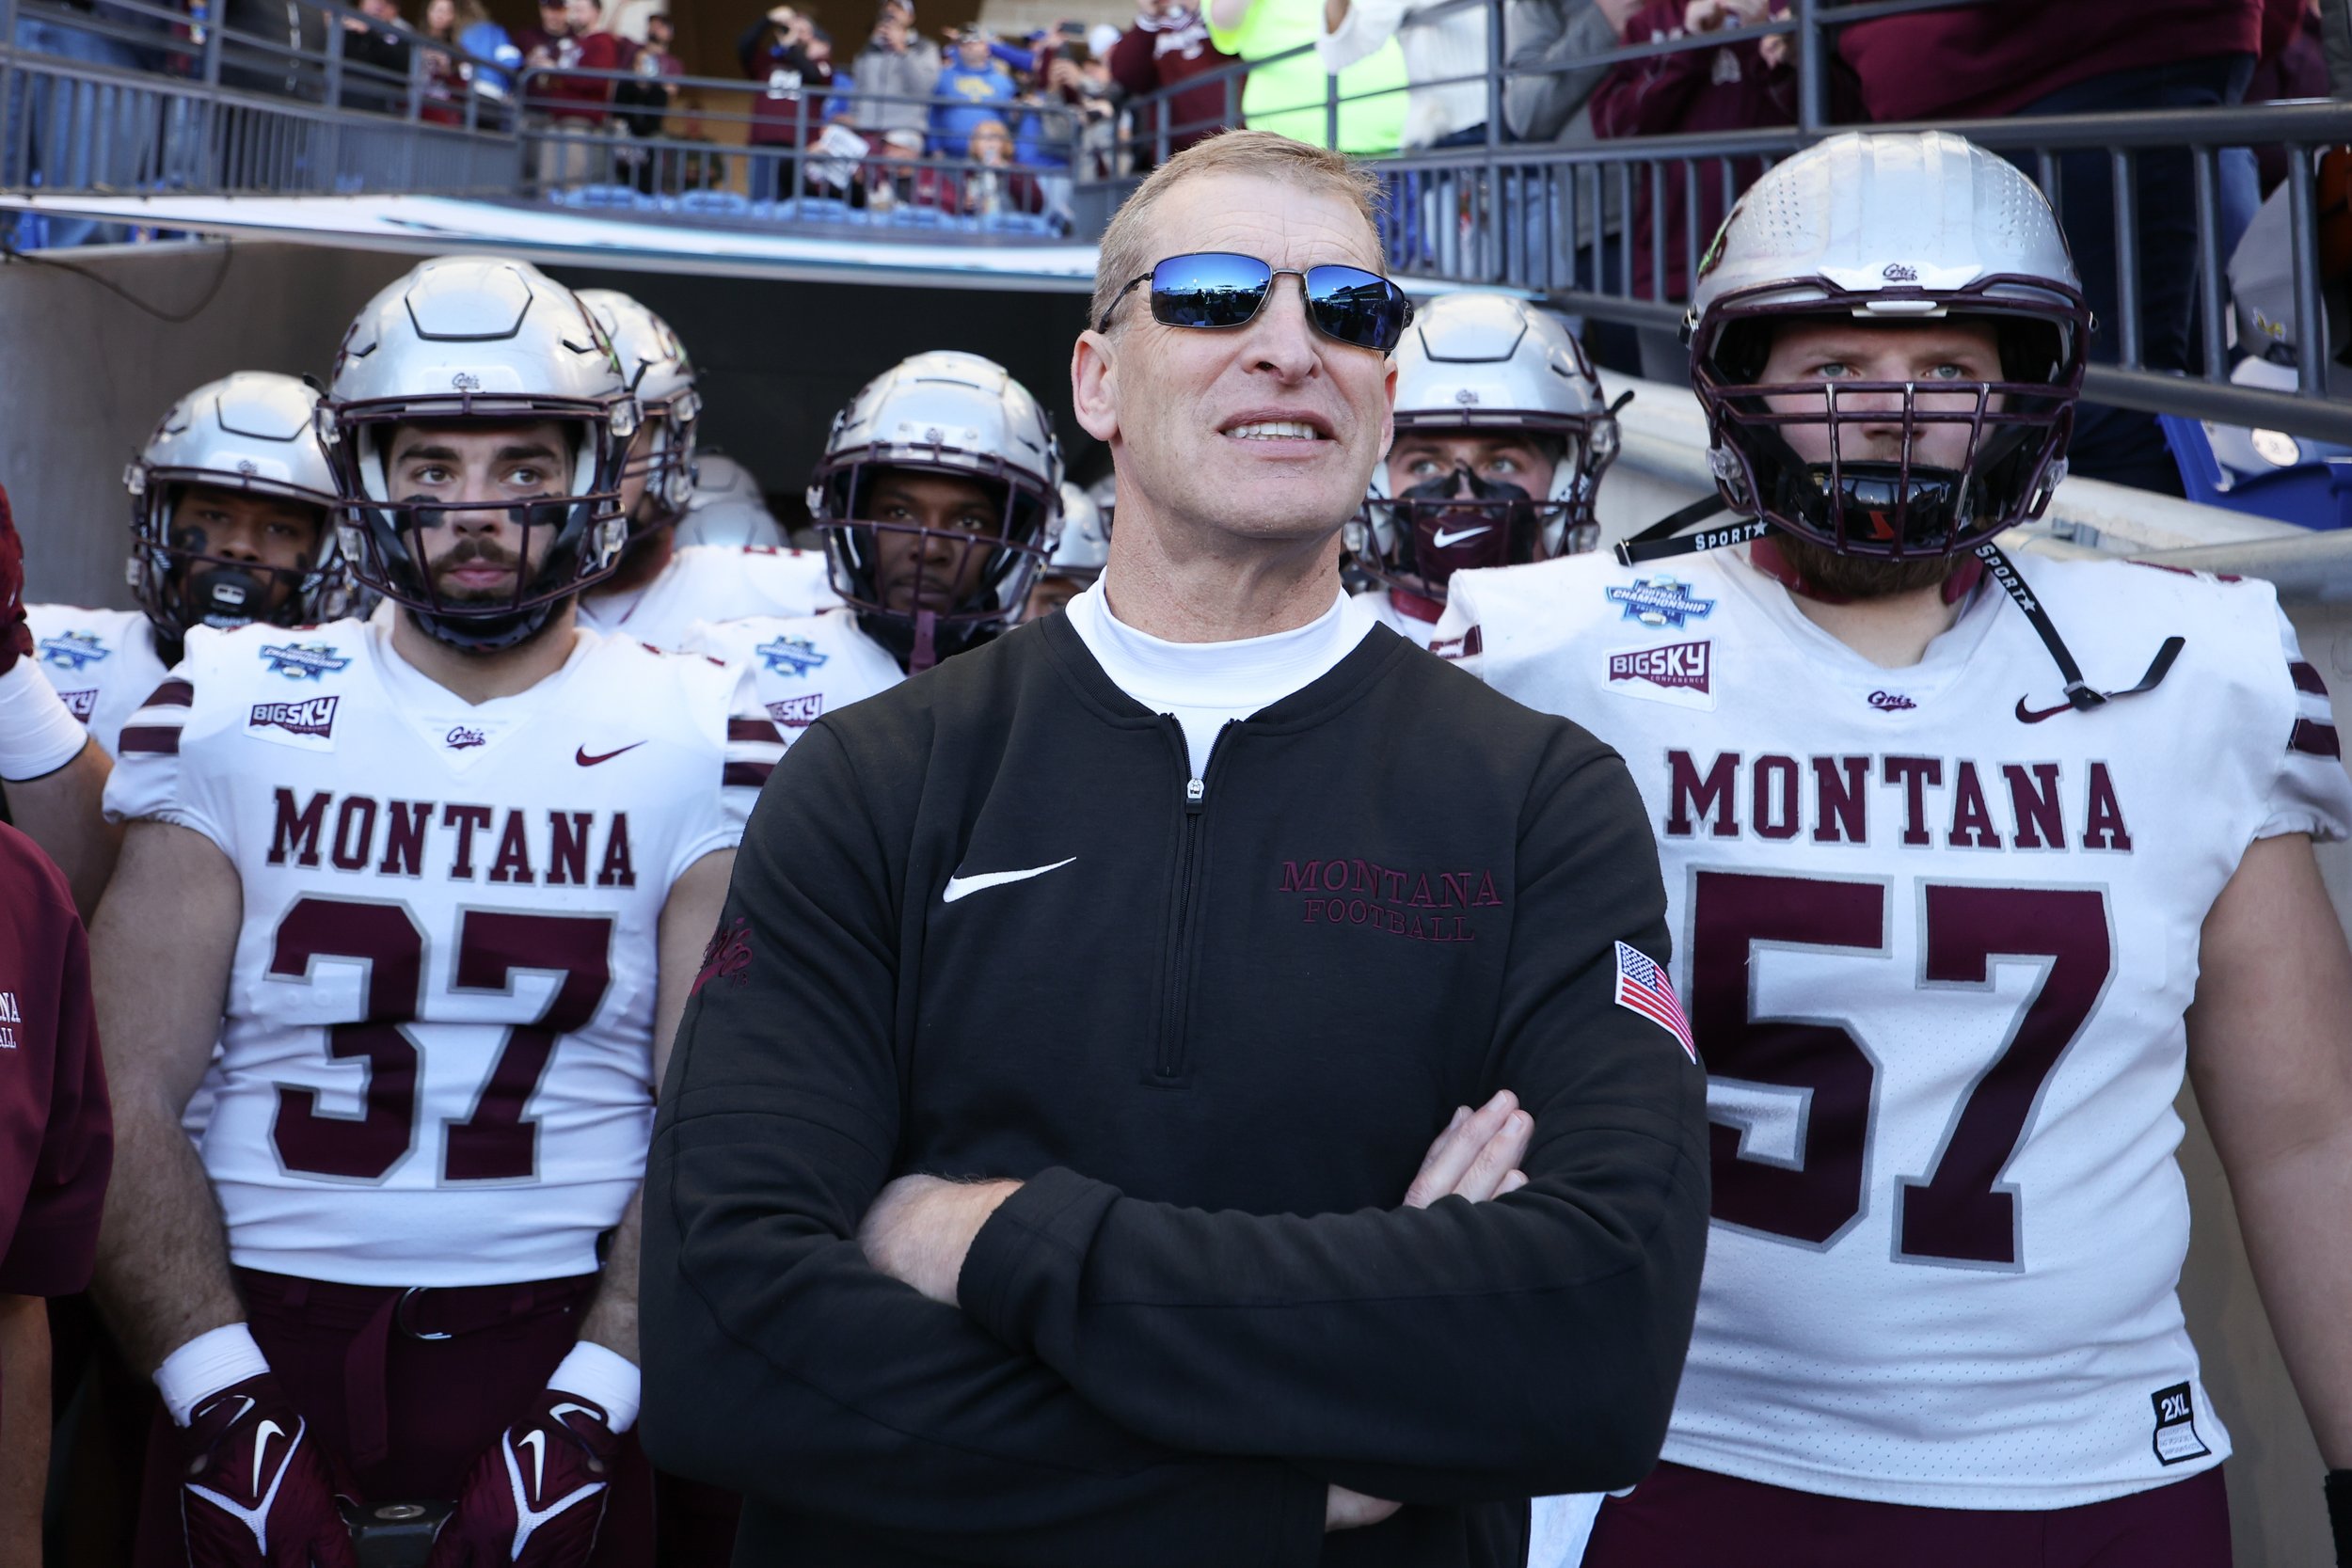  FRISCO, TEXAS - JANUARY 7: Head coach Bobby Hauck of the Montana Grizzlies looks on before taking the field against the South Dakota State Jackrabbits during the Division I FCS Football Championship held at Toyota Stadium on January 7, 2024 in Frisc